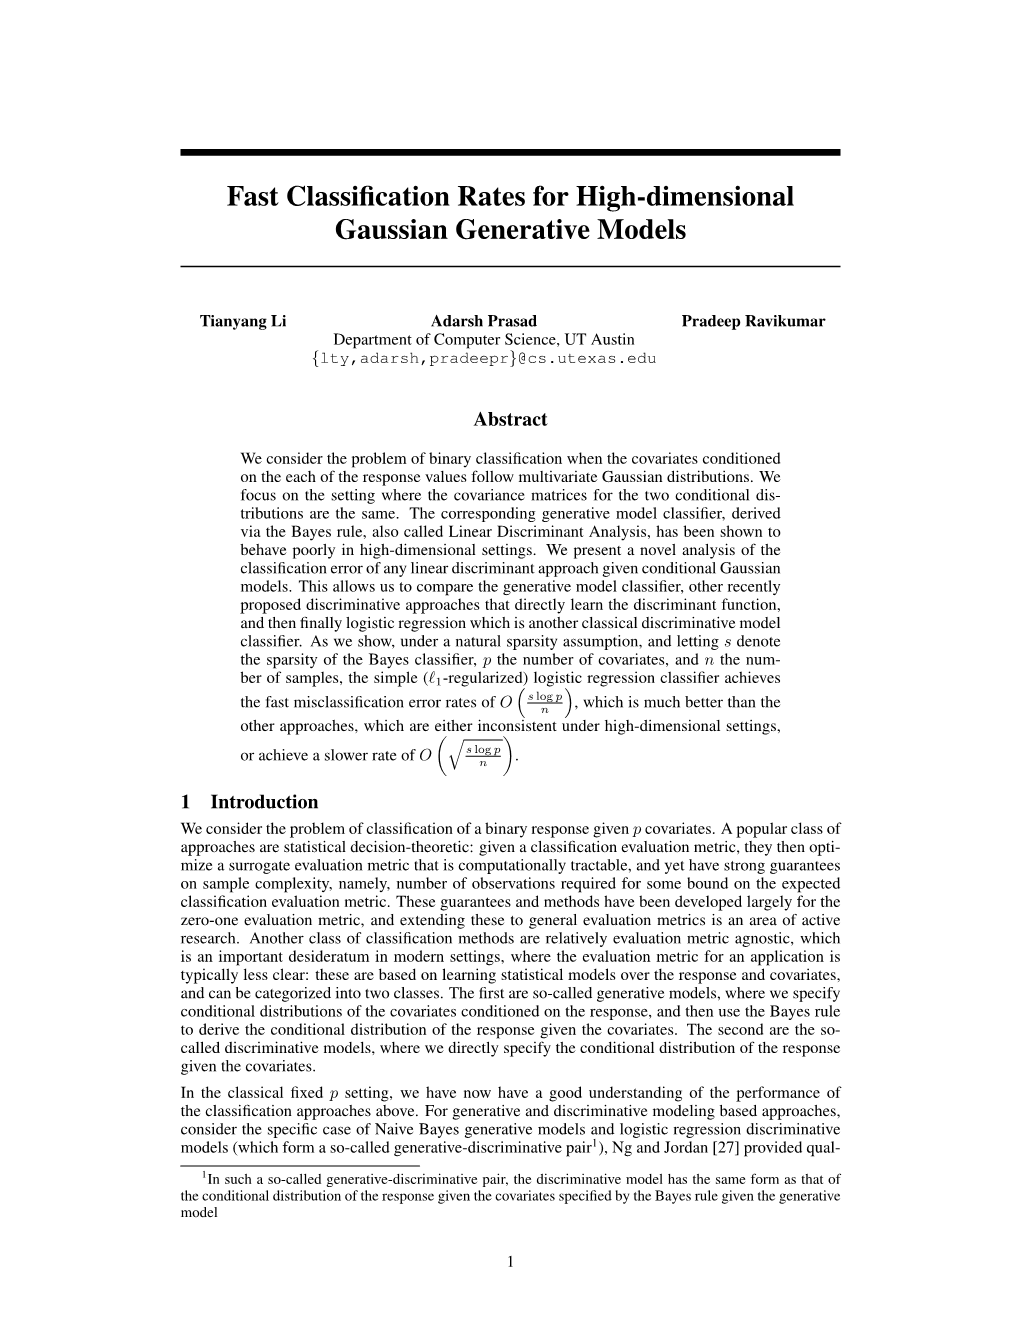 Fast Classification Rates for High-Dimensional Gaussian Generative Models